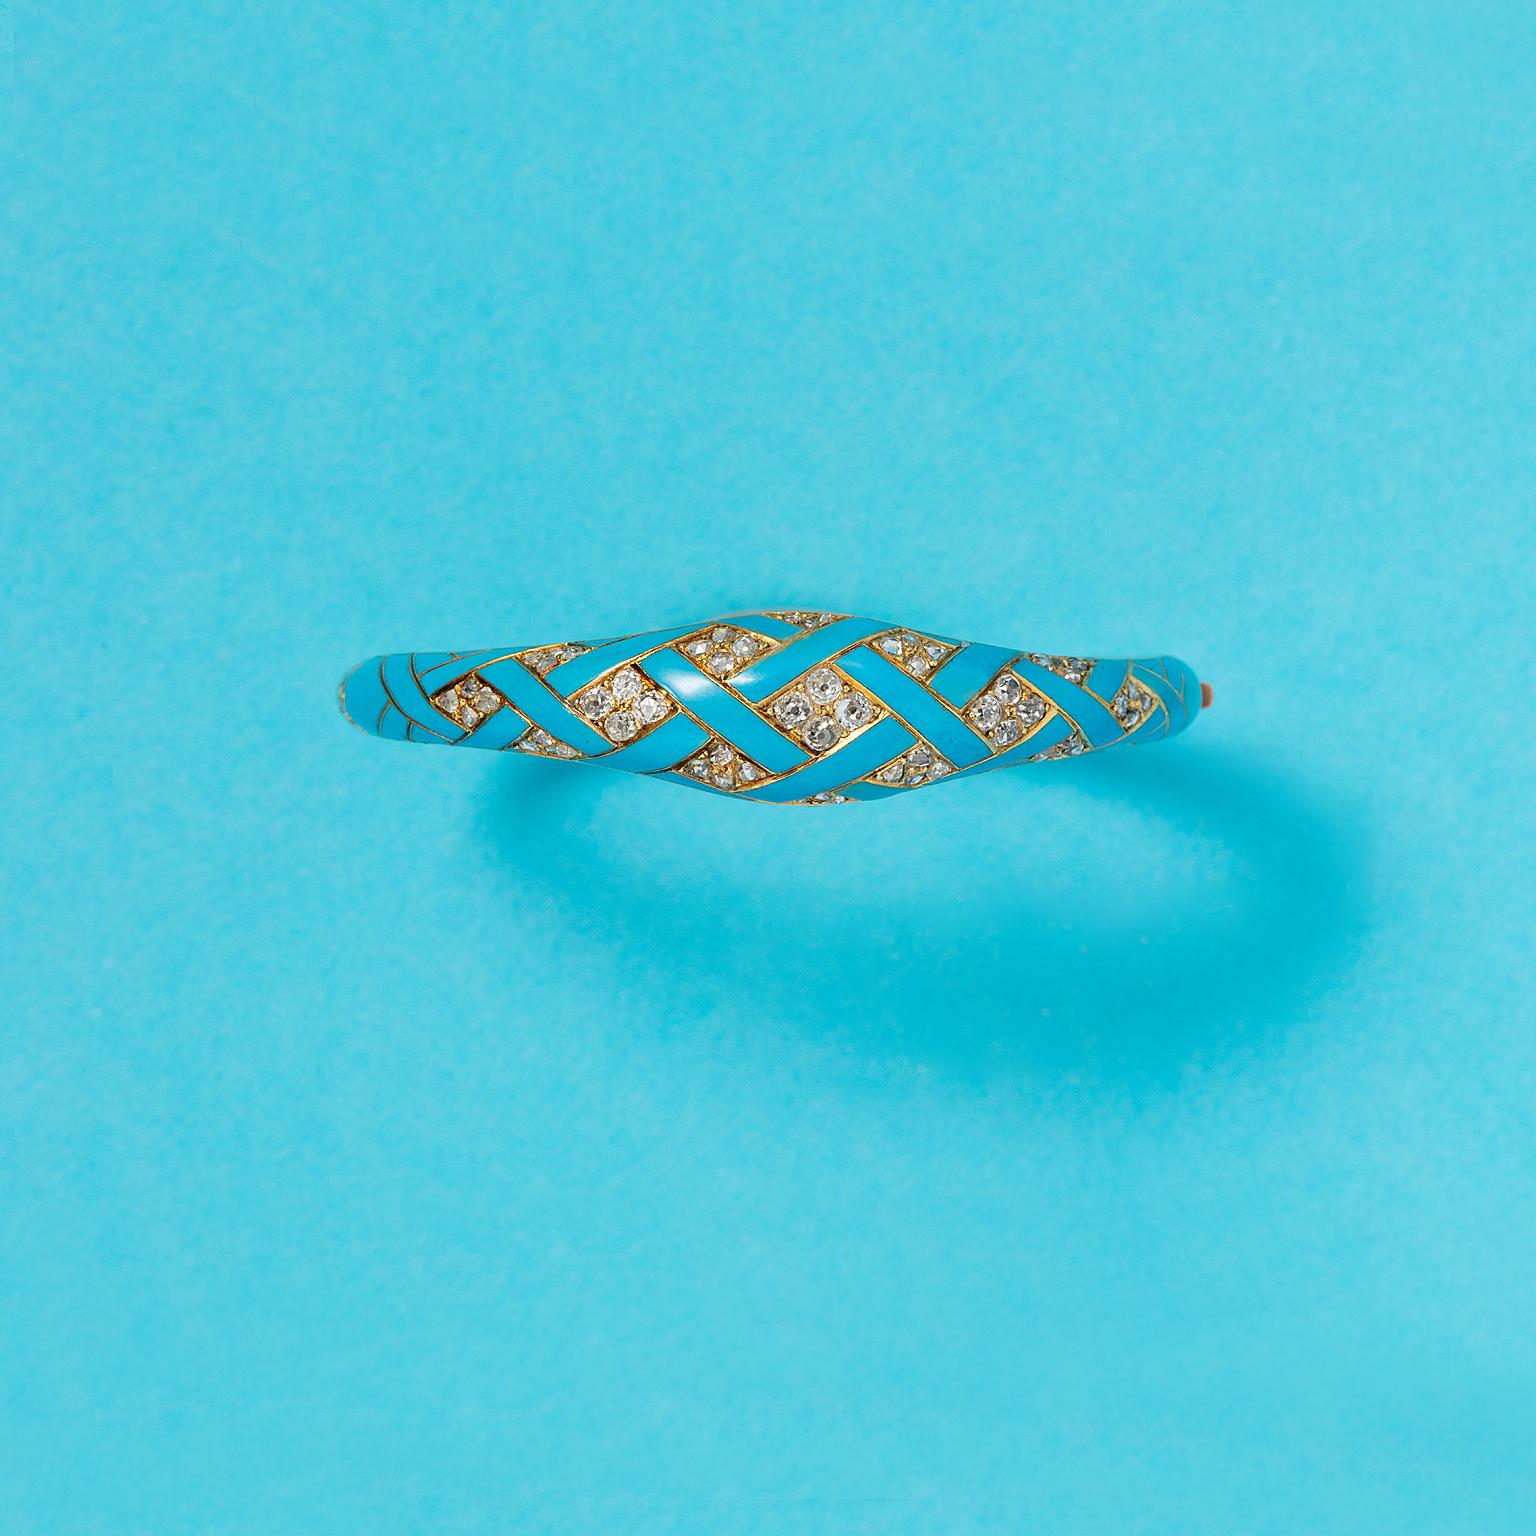 A Victorian 18 carat gold bracelet with turquoise enamel and rose cut and old cut diamonds (circa 0.8 carat), end 19th century, most likely English in origin. 

weight: 23 grams 
Circumference: 17.5 cm fits a small to medium size wrist 
